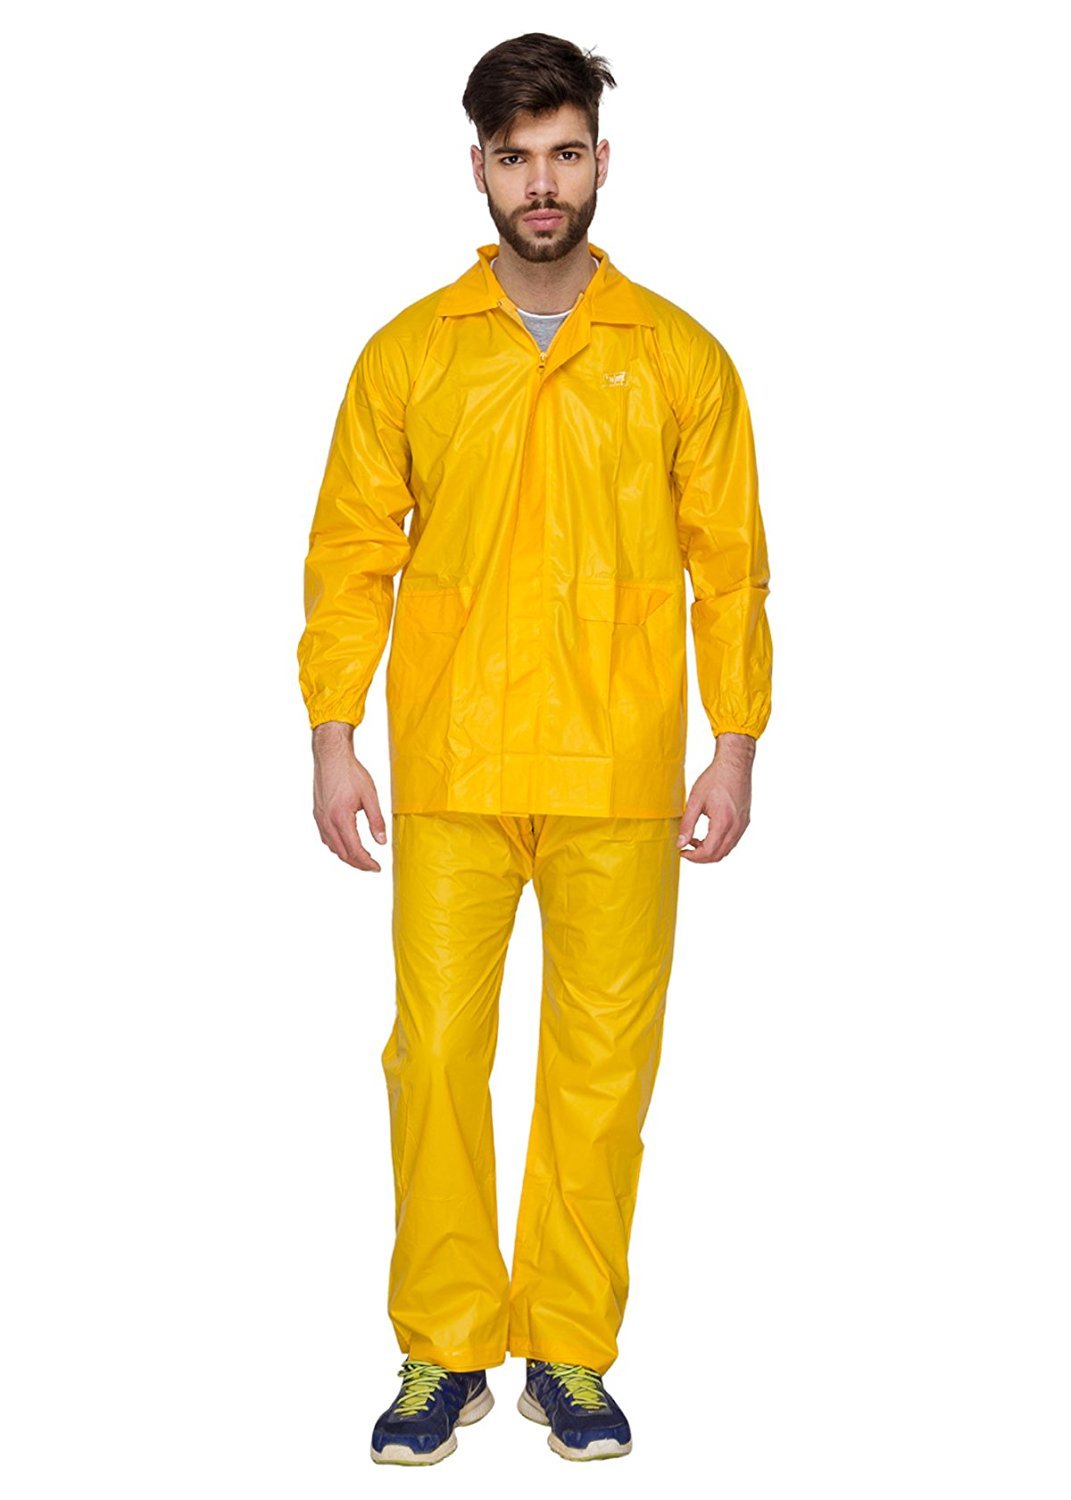 PVC Protective Work Wear